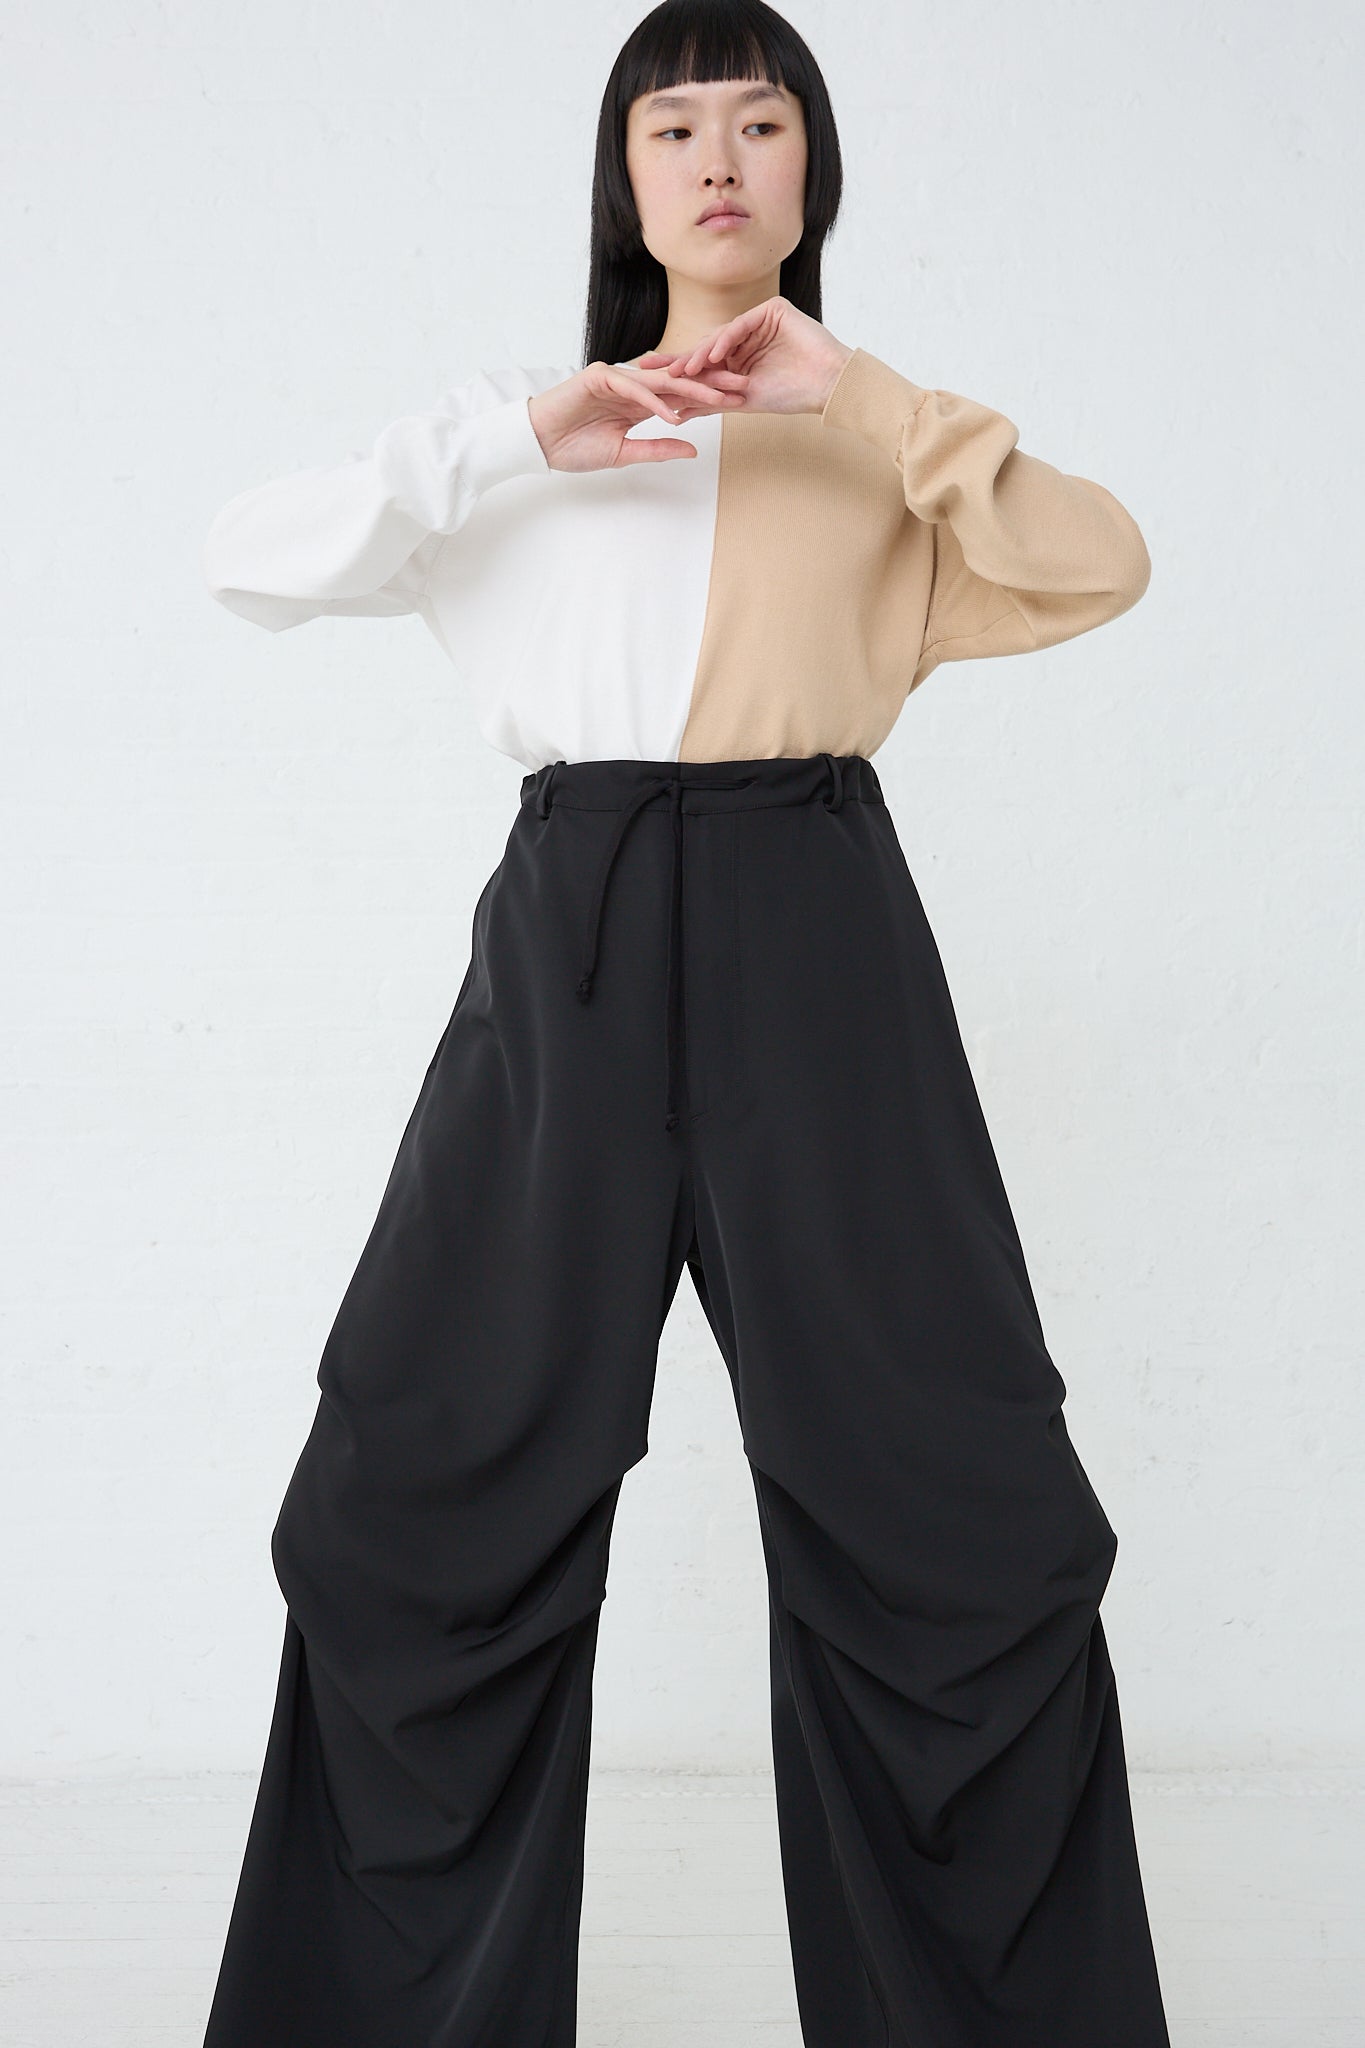 A model wearing MM6's Pant in Black, an oversized silhouette black wide leg pants with a drawstring waist, and a beige twill stretch top. Front view and full length.